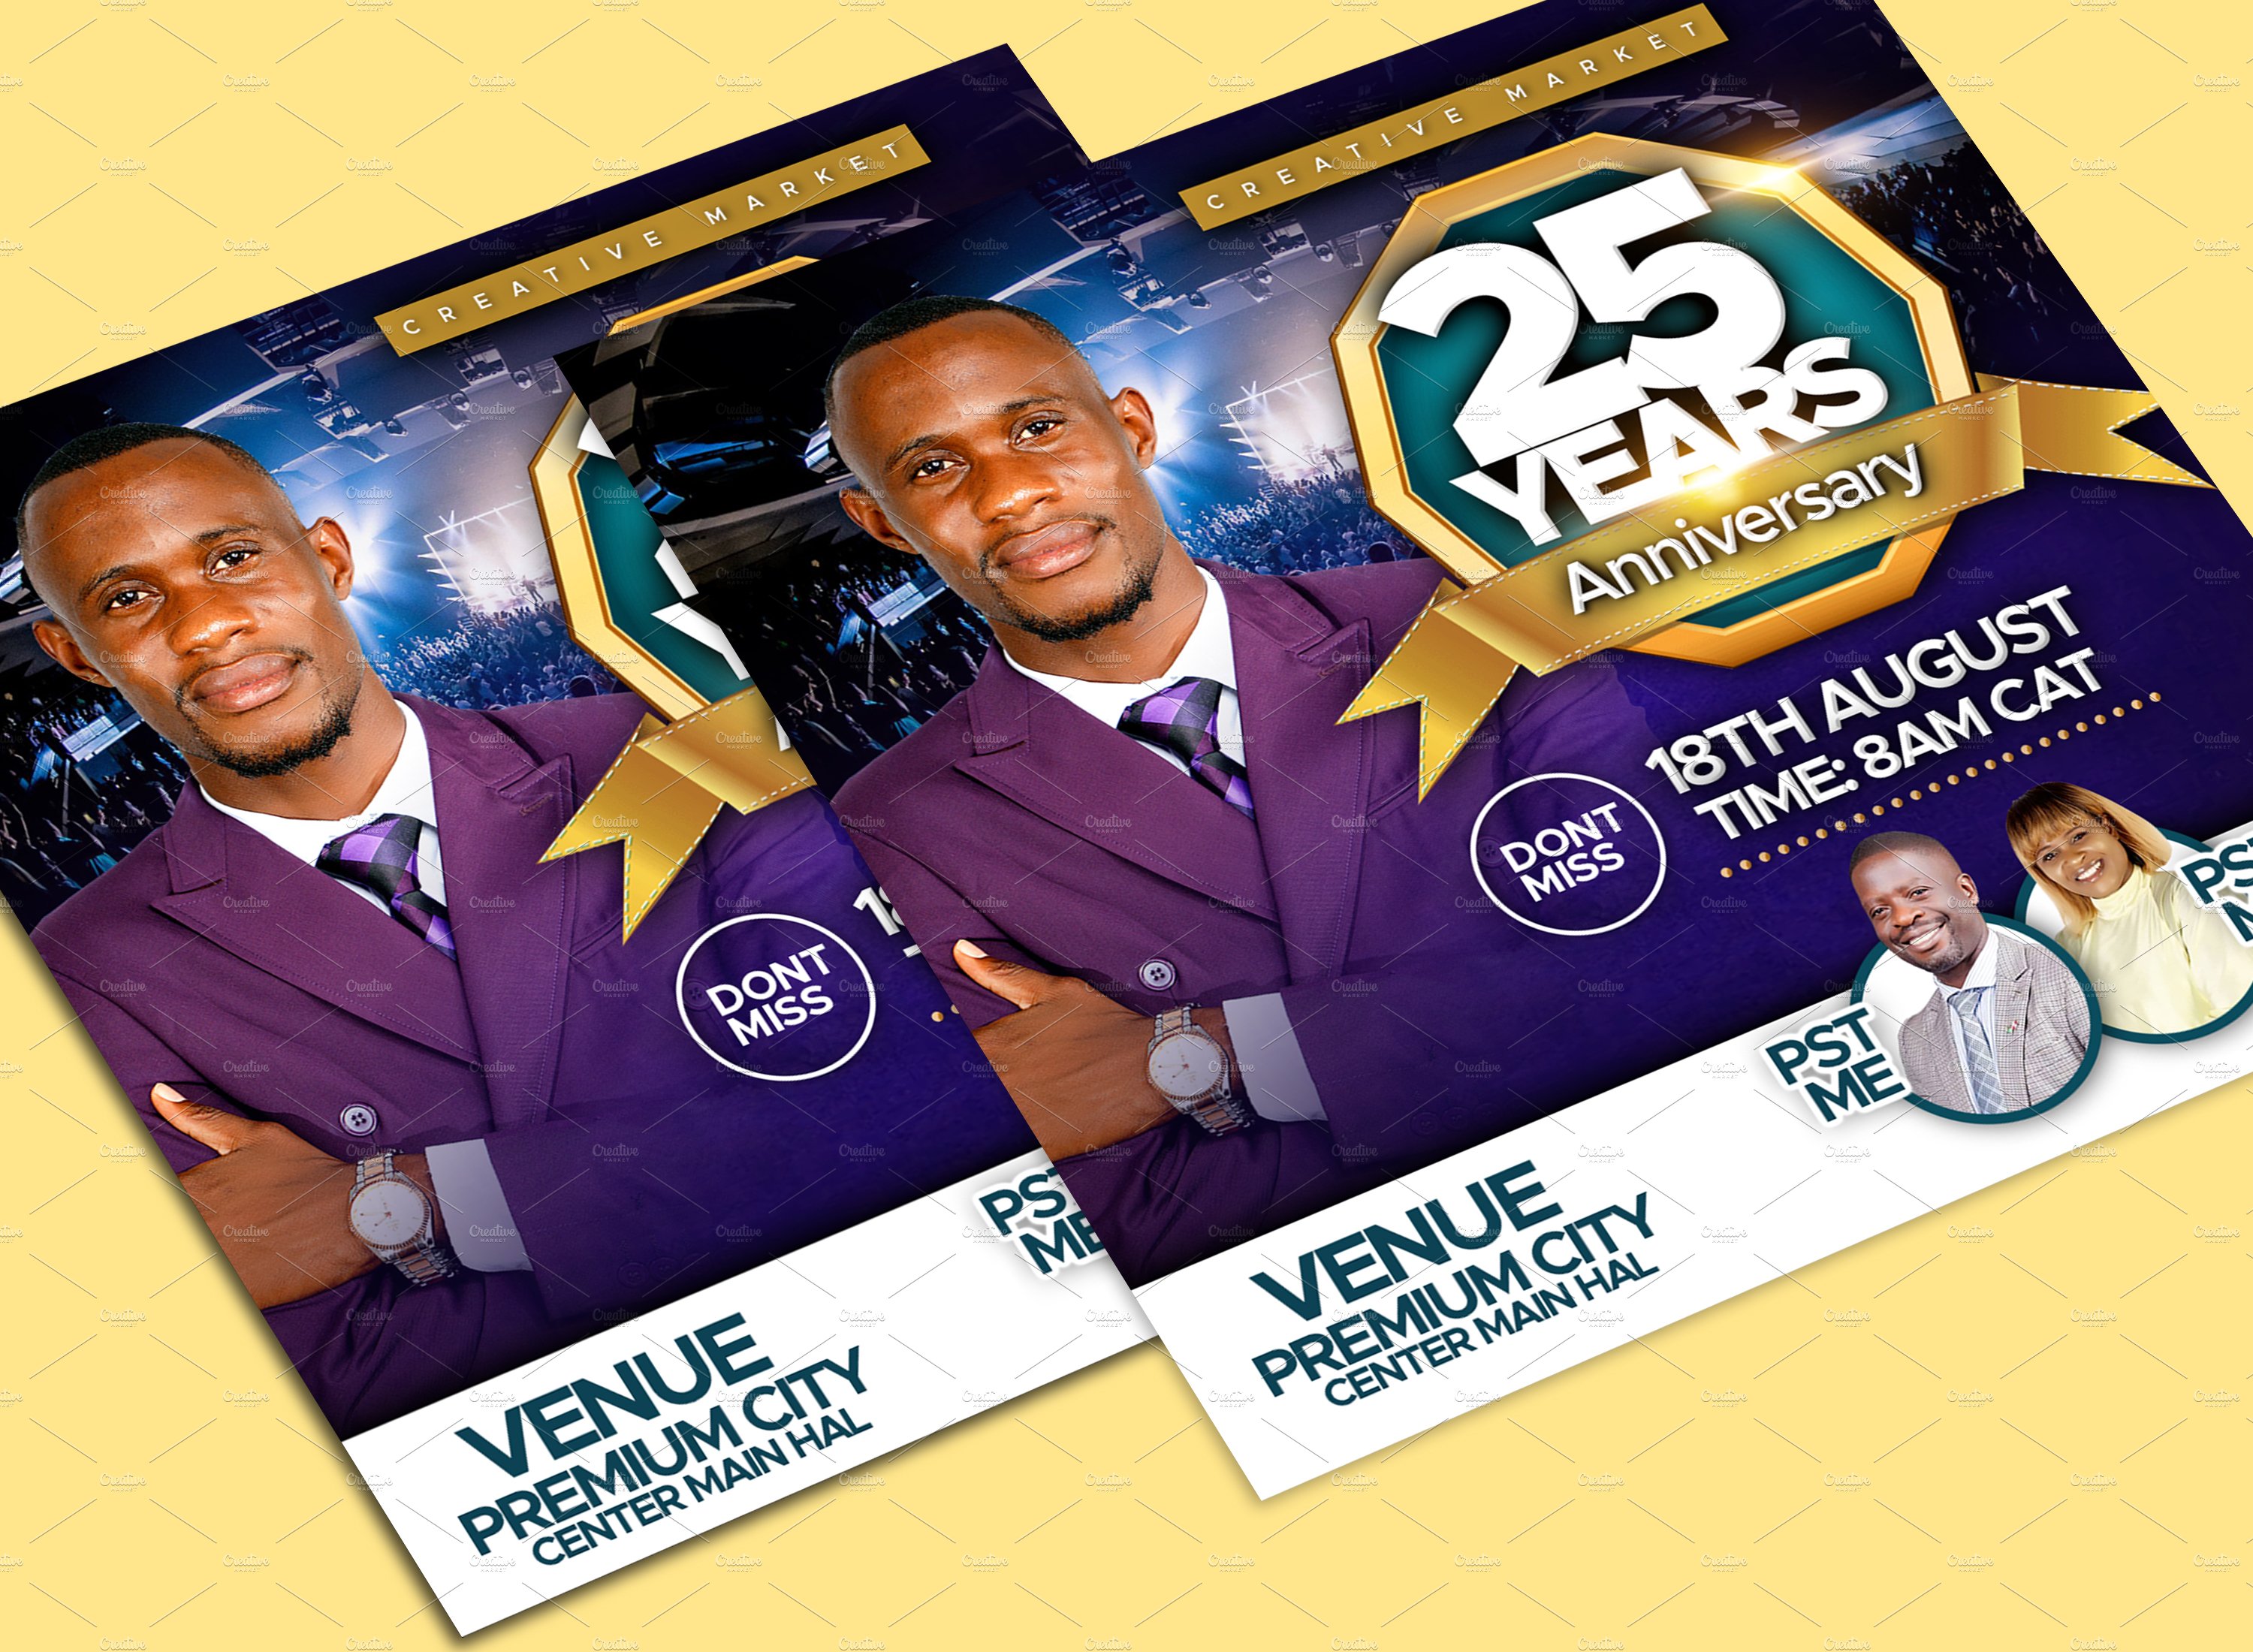 Church Anniversary Flyer Template cover image.